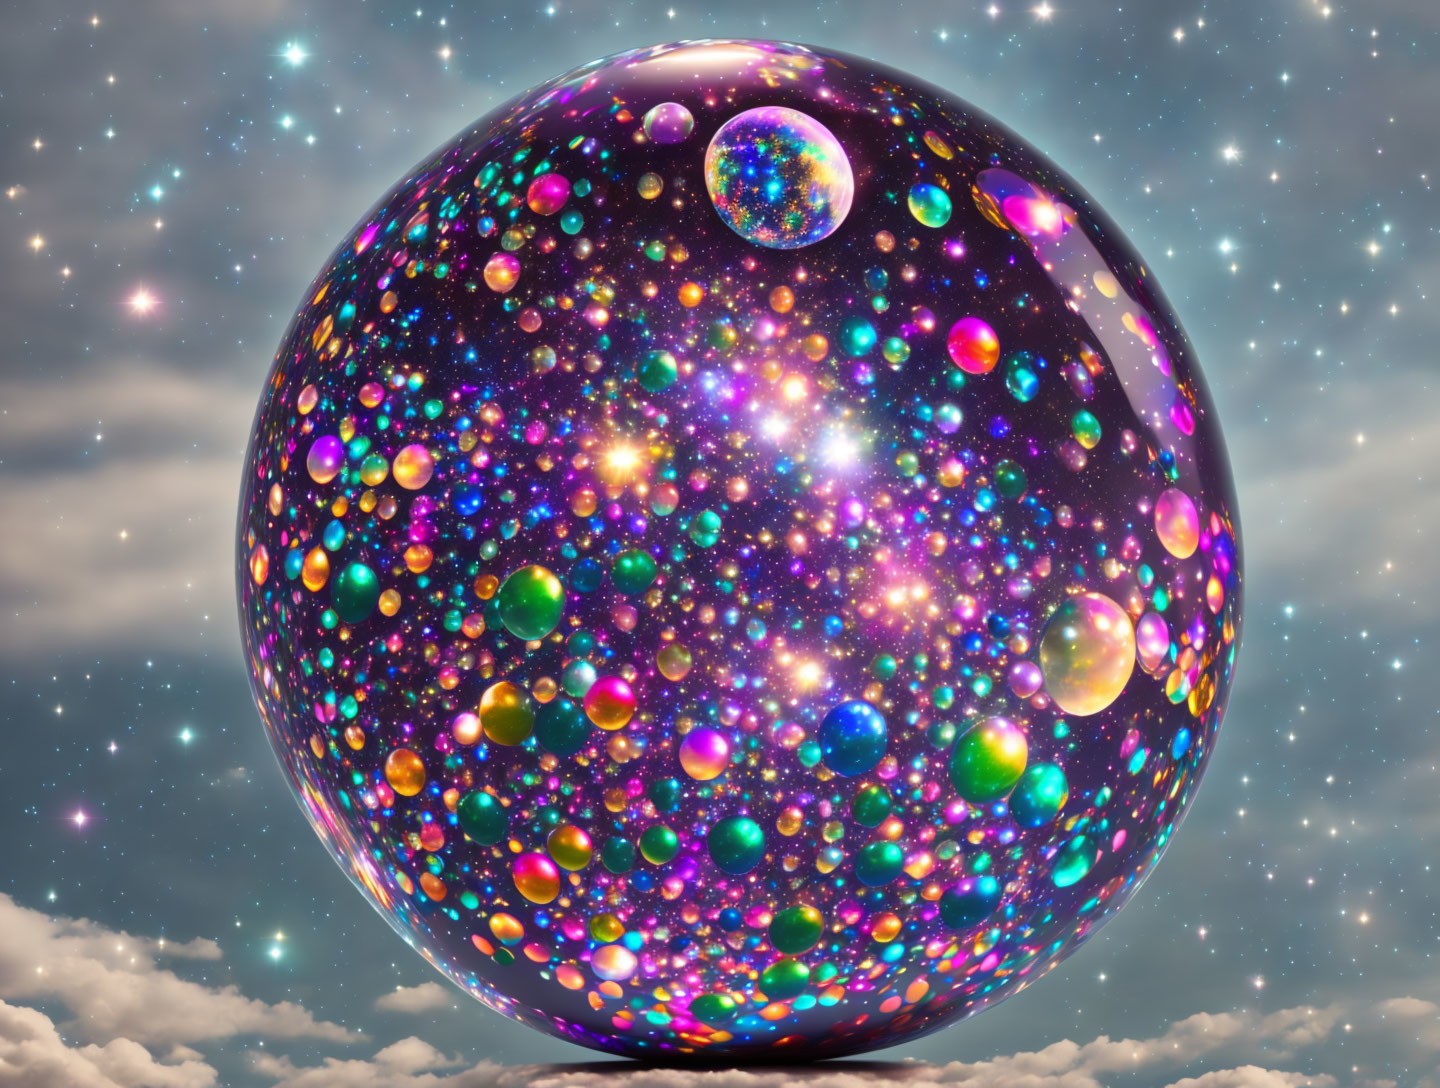 Colorful cosmic sphere and bubbles against starry sky.